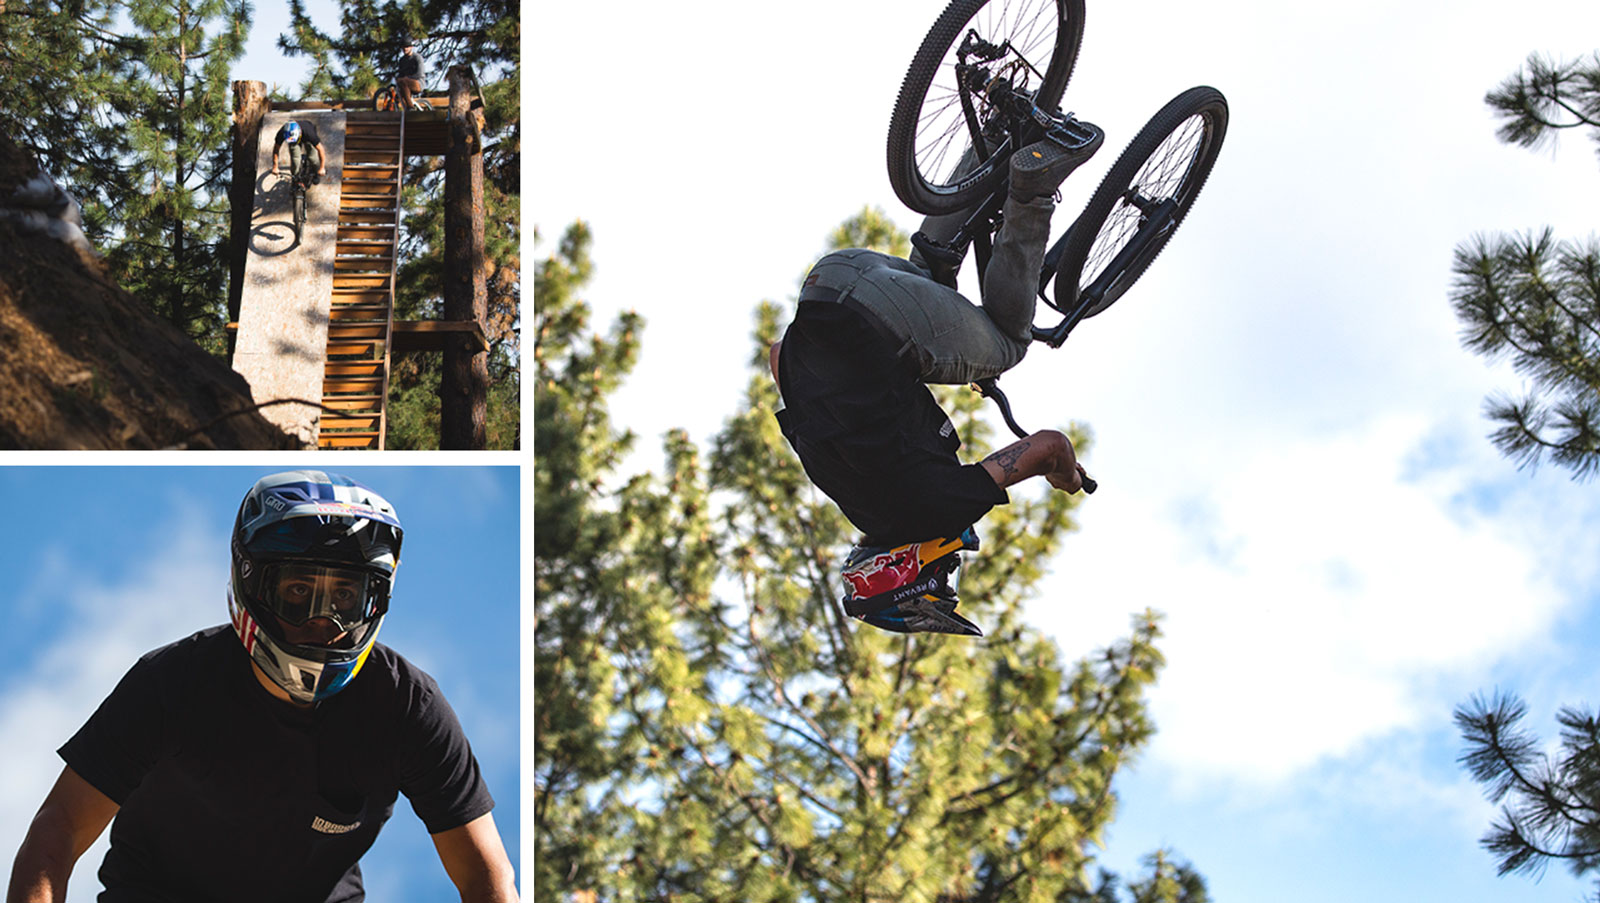 Collage of Carson Storch training in backyard with Revant Goggles